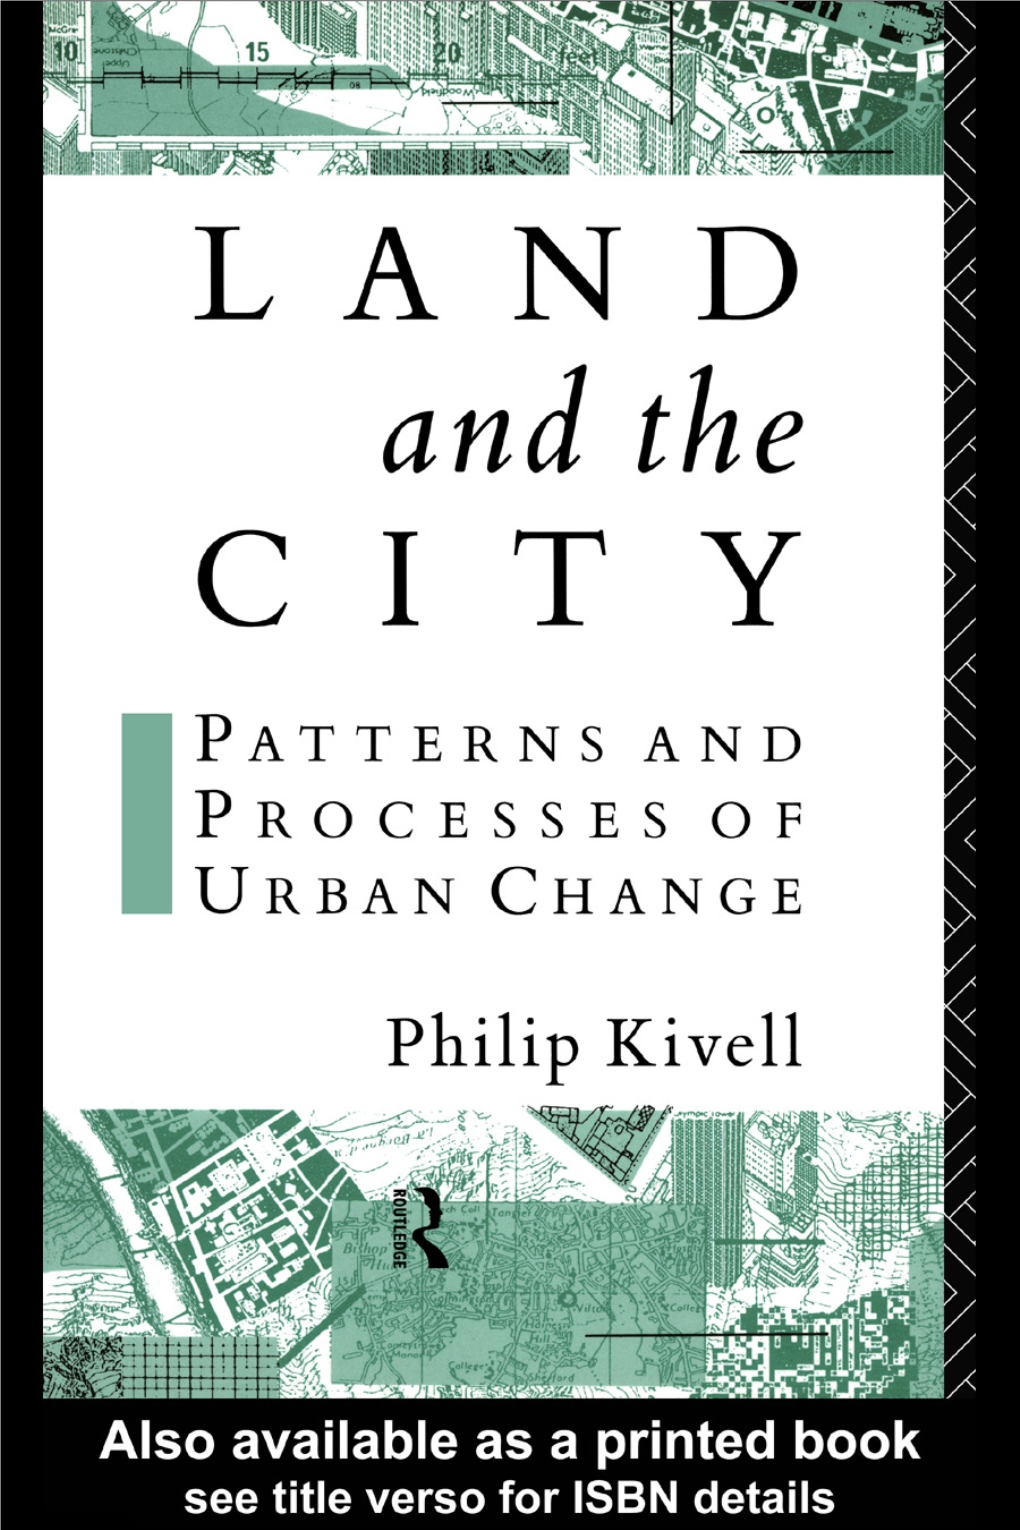 Land and the City: Patterns and Processes of Urban Change/ Philip Kivell